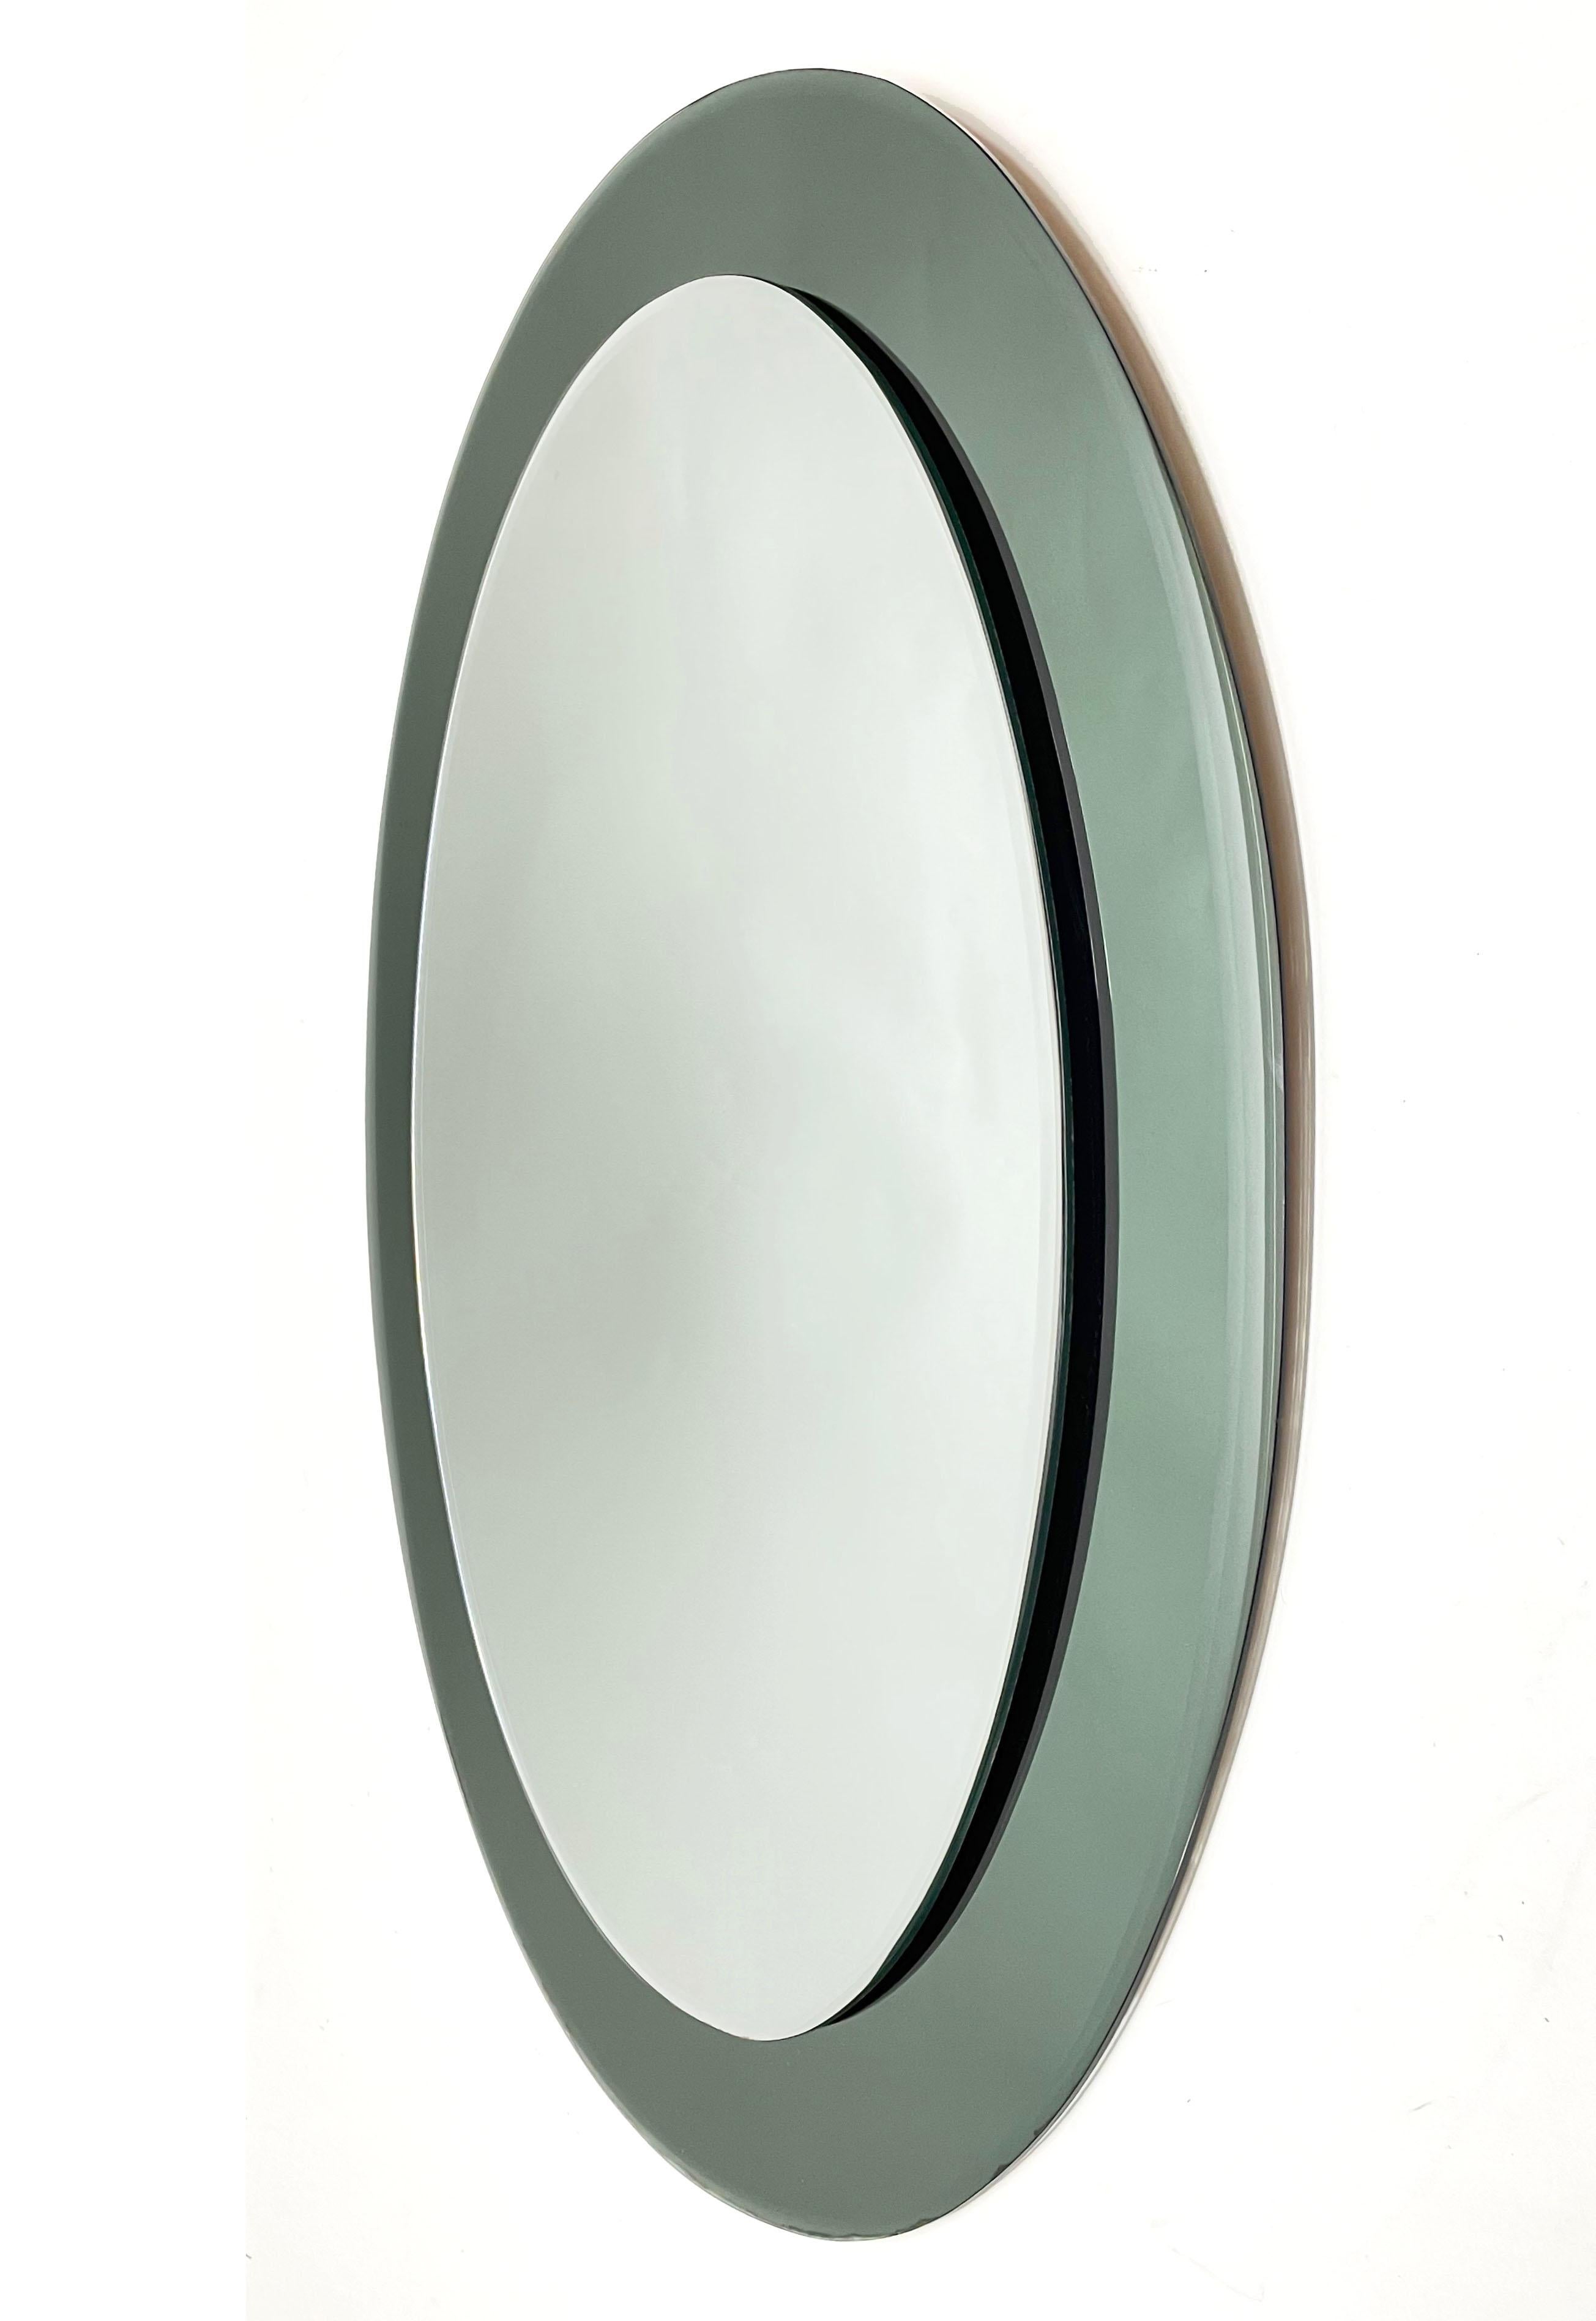 Italian Midcentury Glass Framed Oval Wall Mirror Attributed to Cristal Art, Italy, 1960s